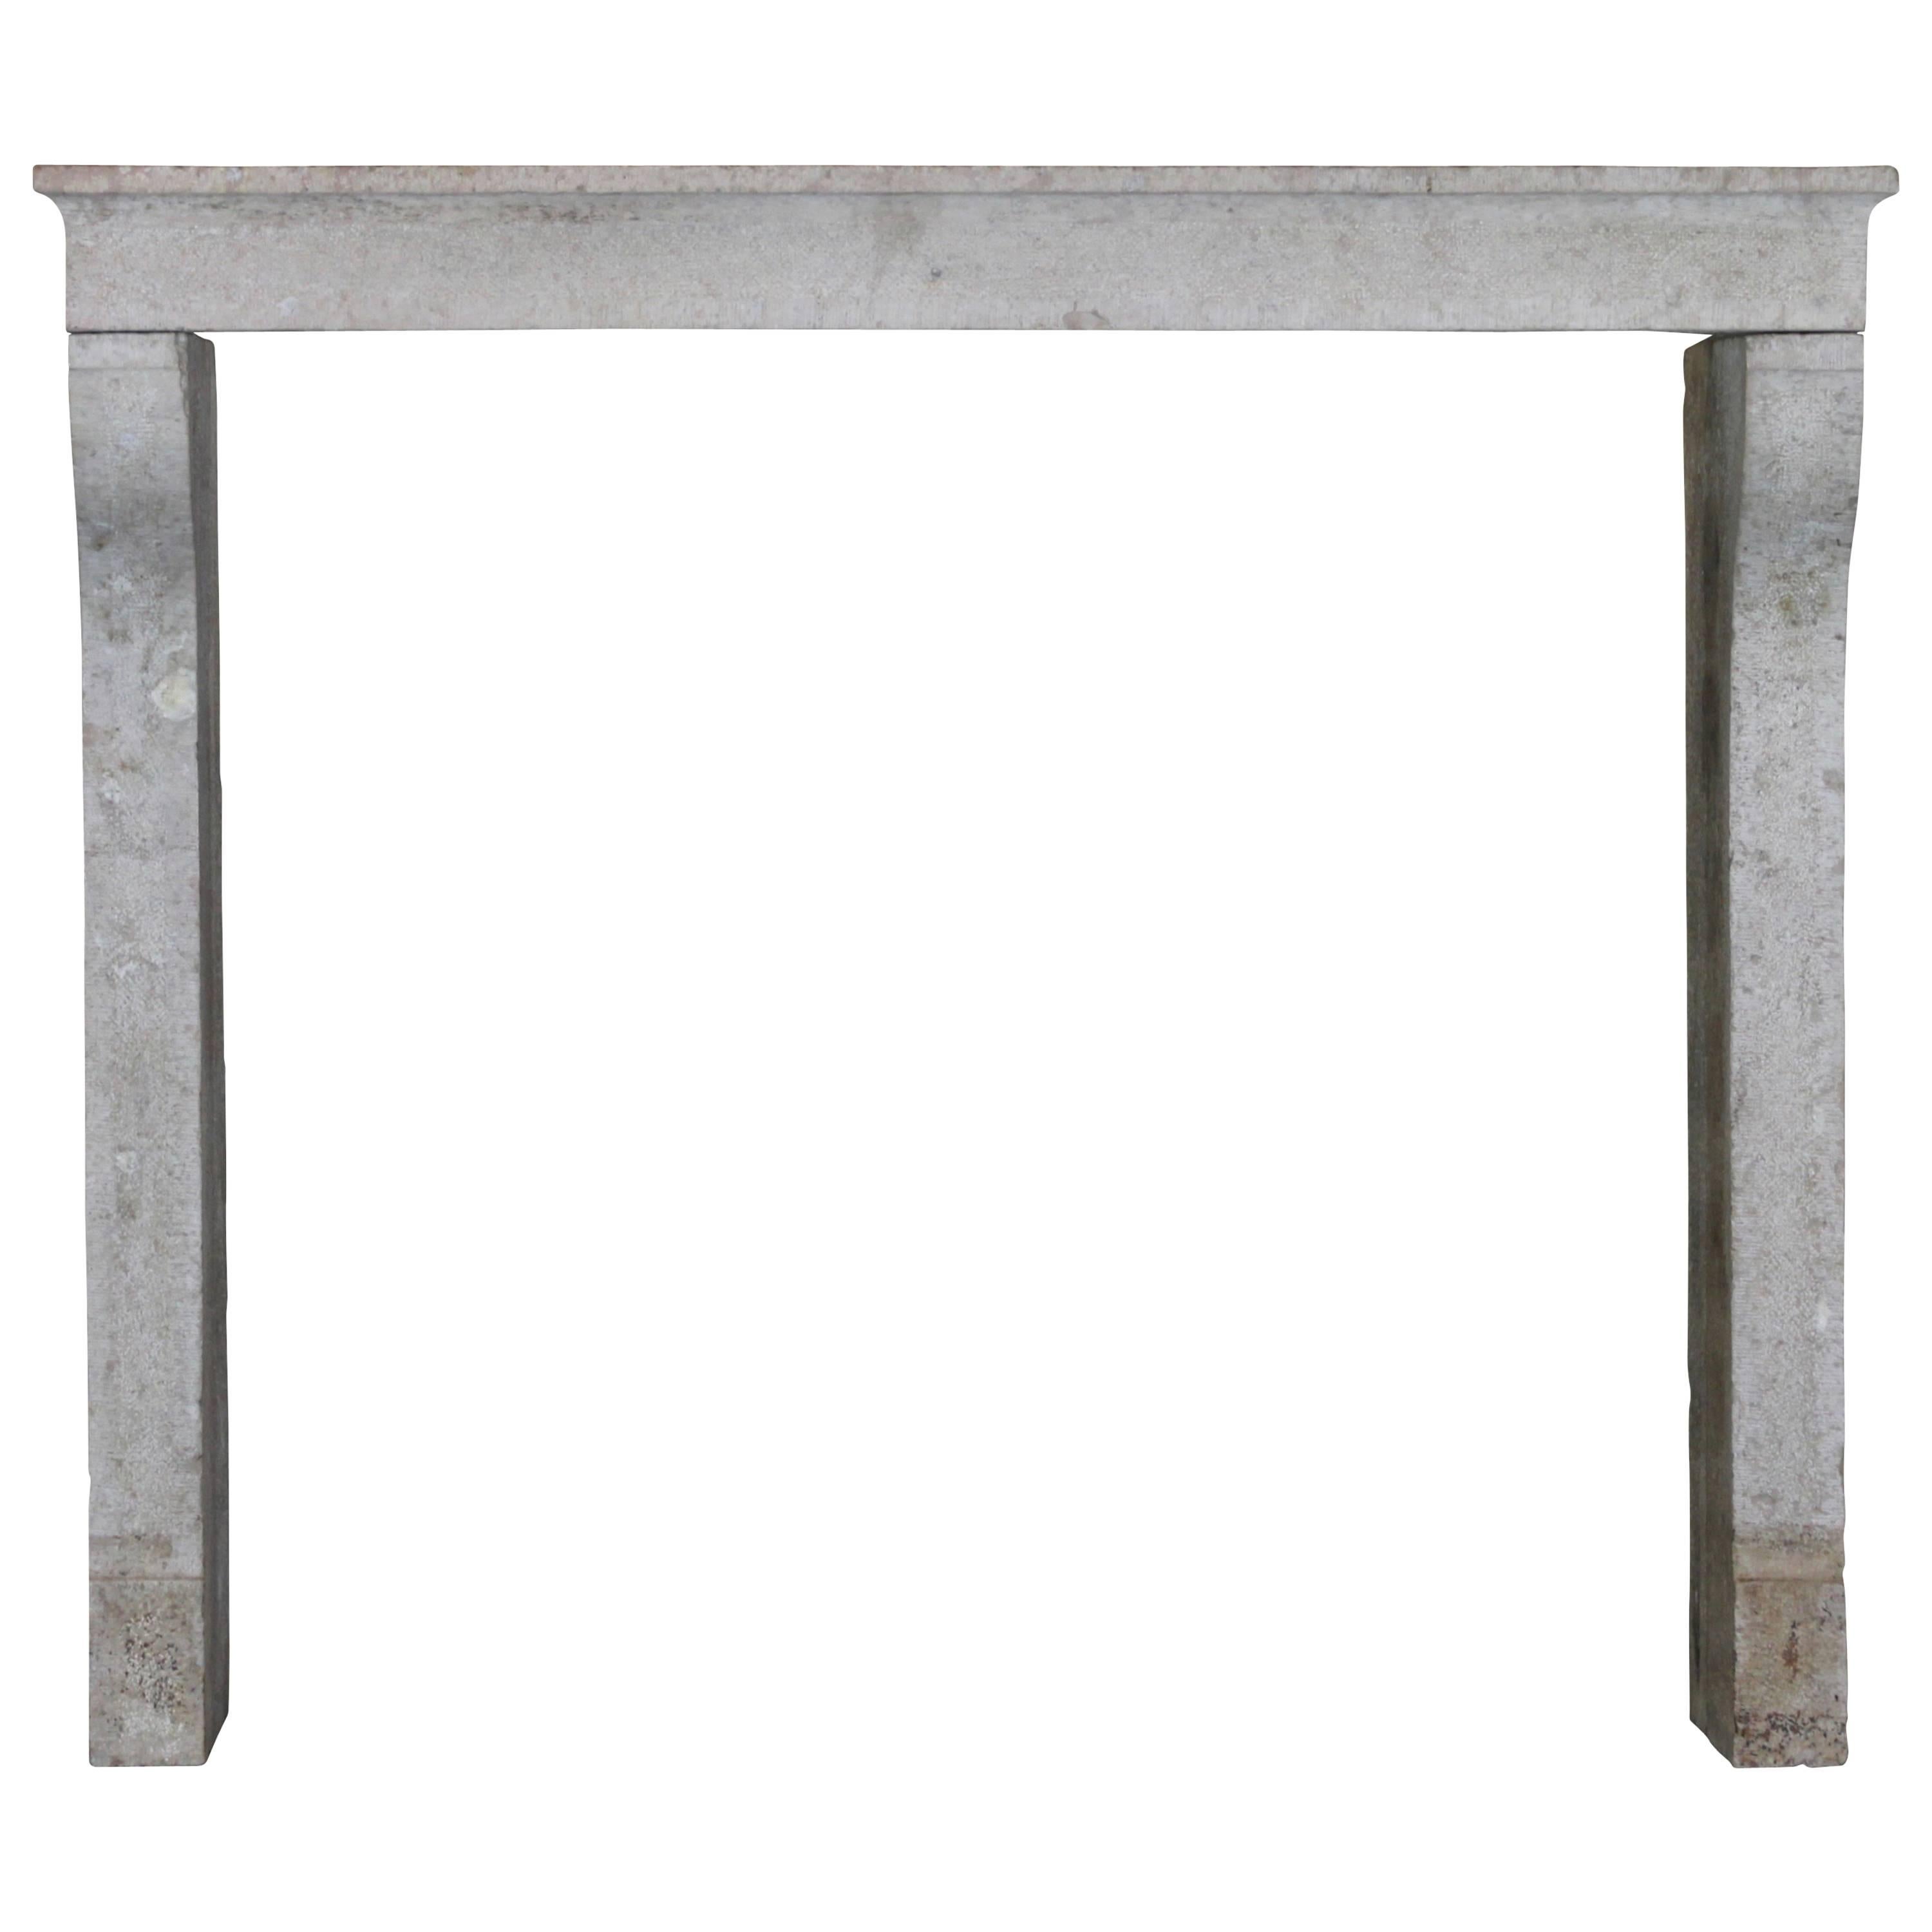 17th Century Rustic Antique Fireplace Mantel in Stone